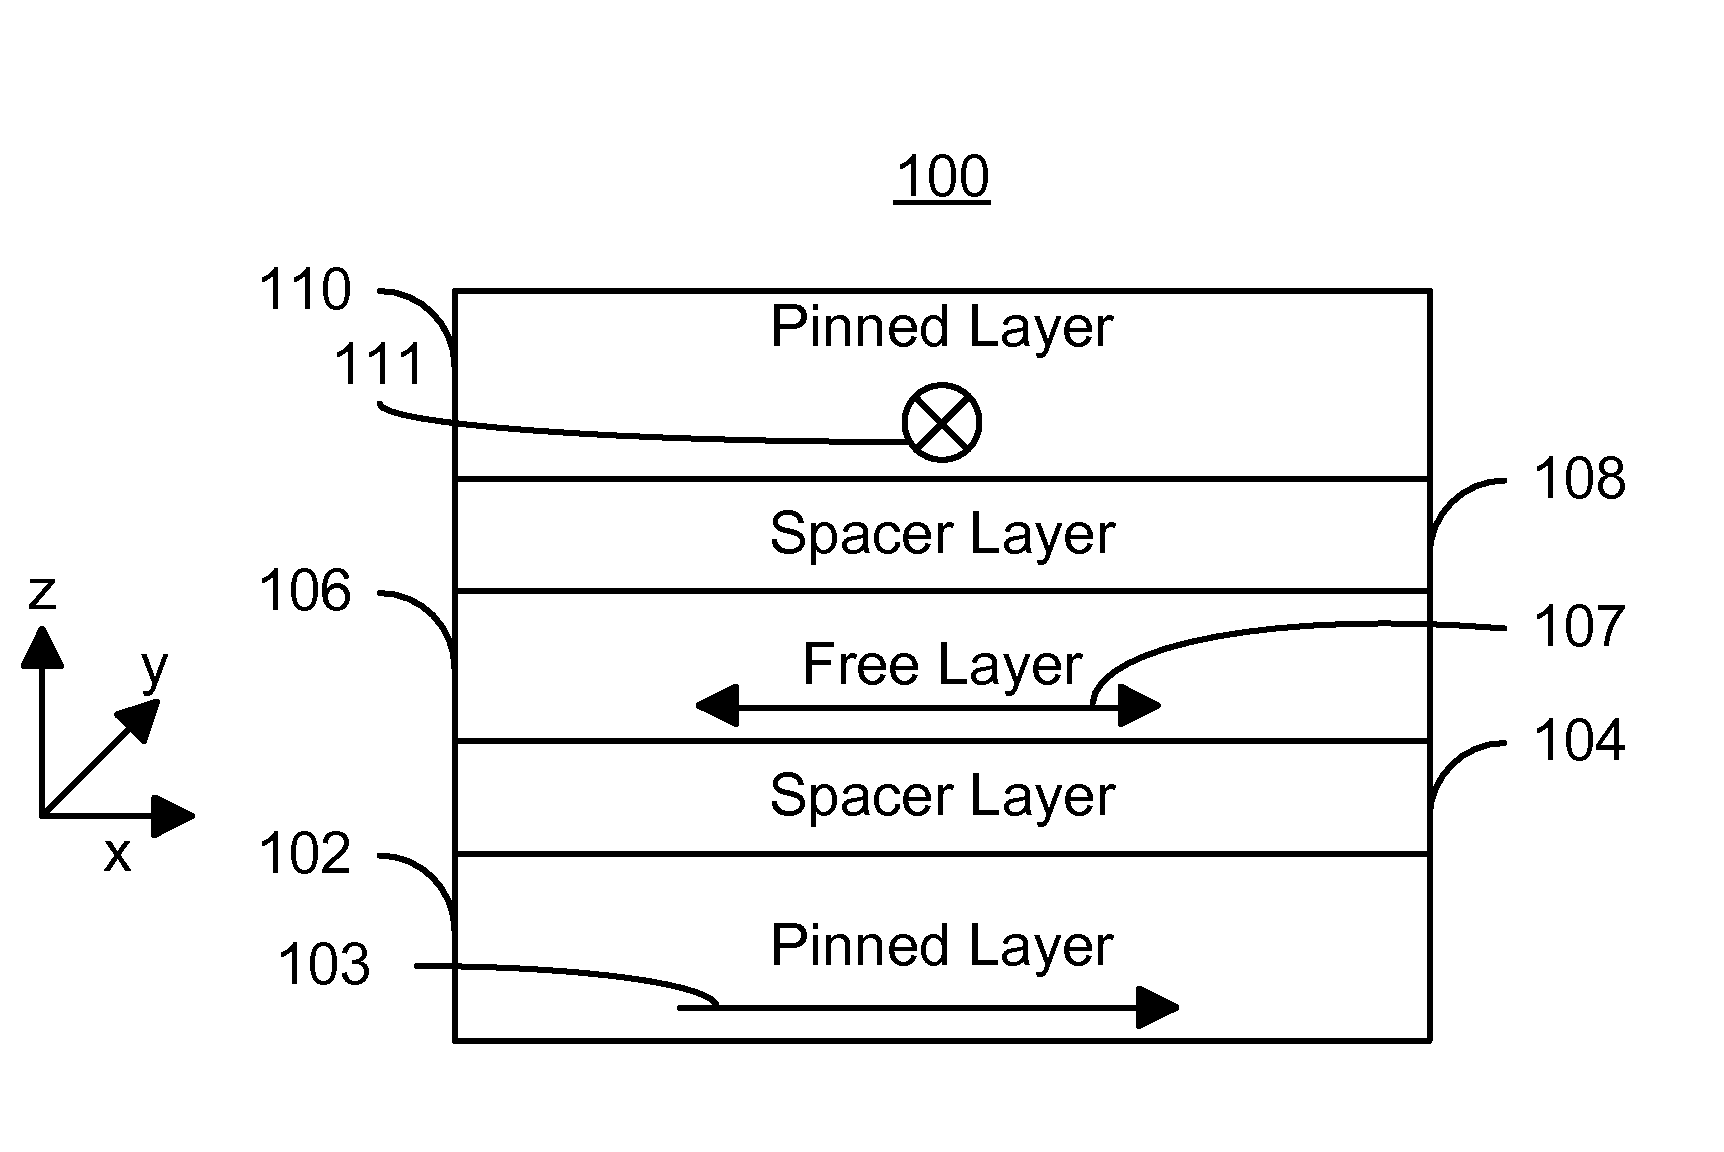 Method and system for providing a spin transfer device with improved switching characteristics